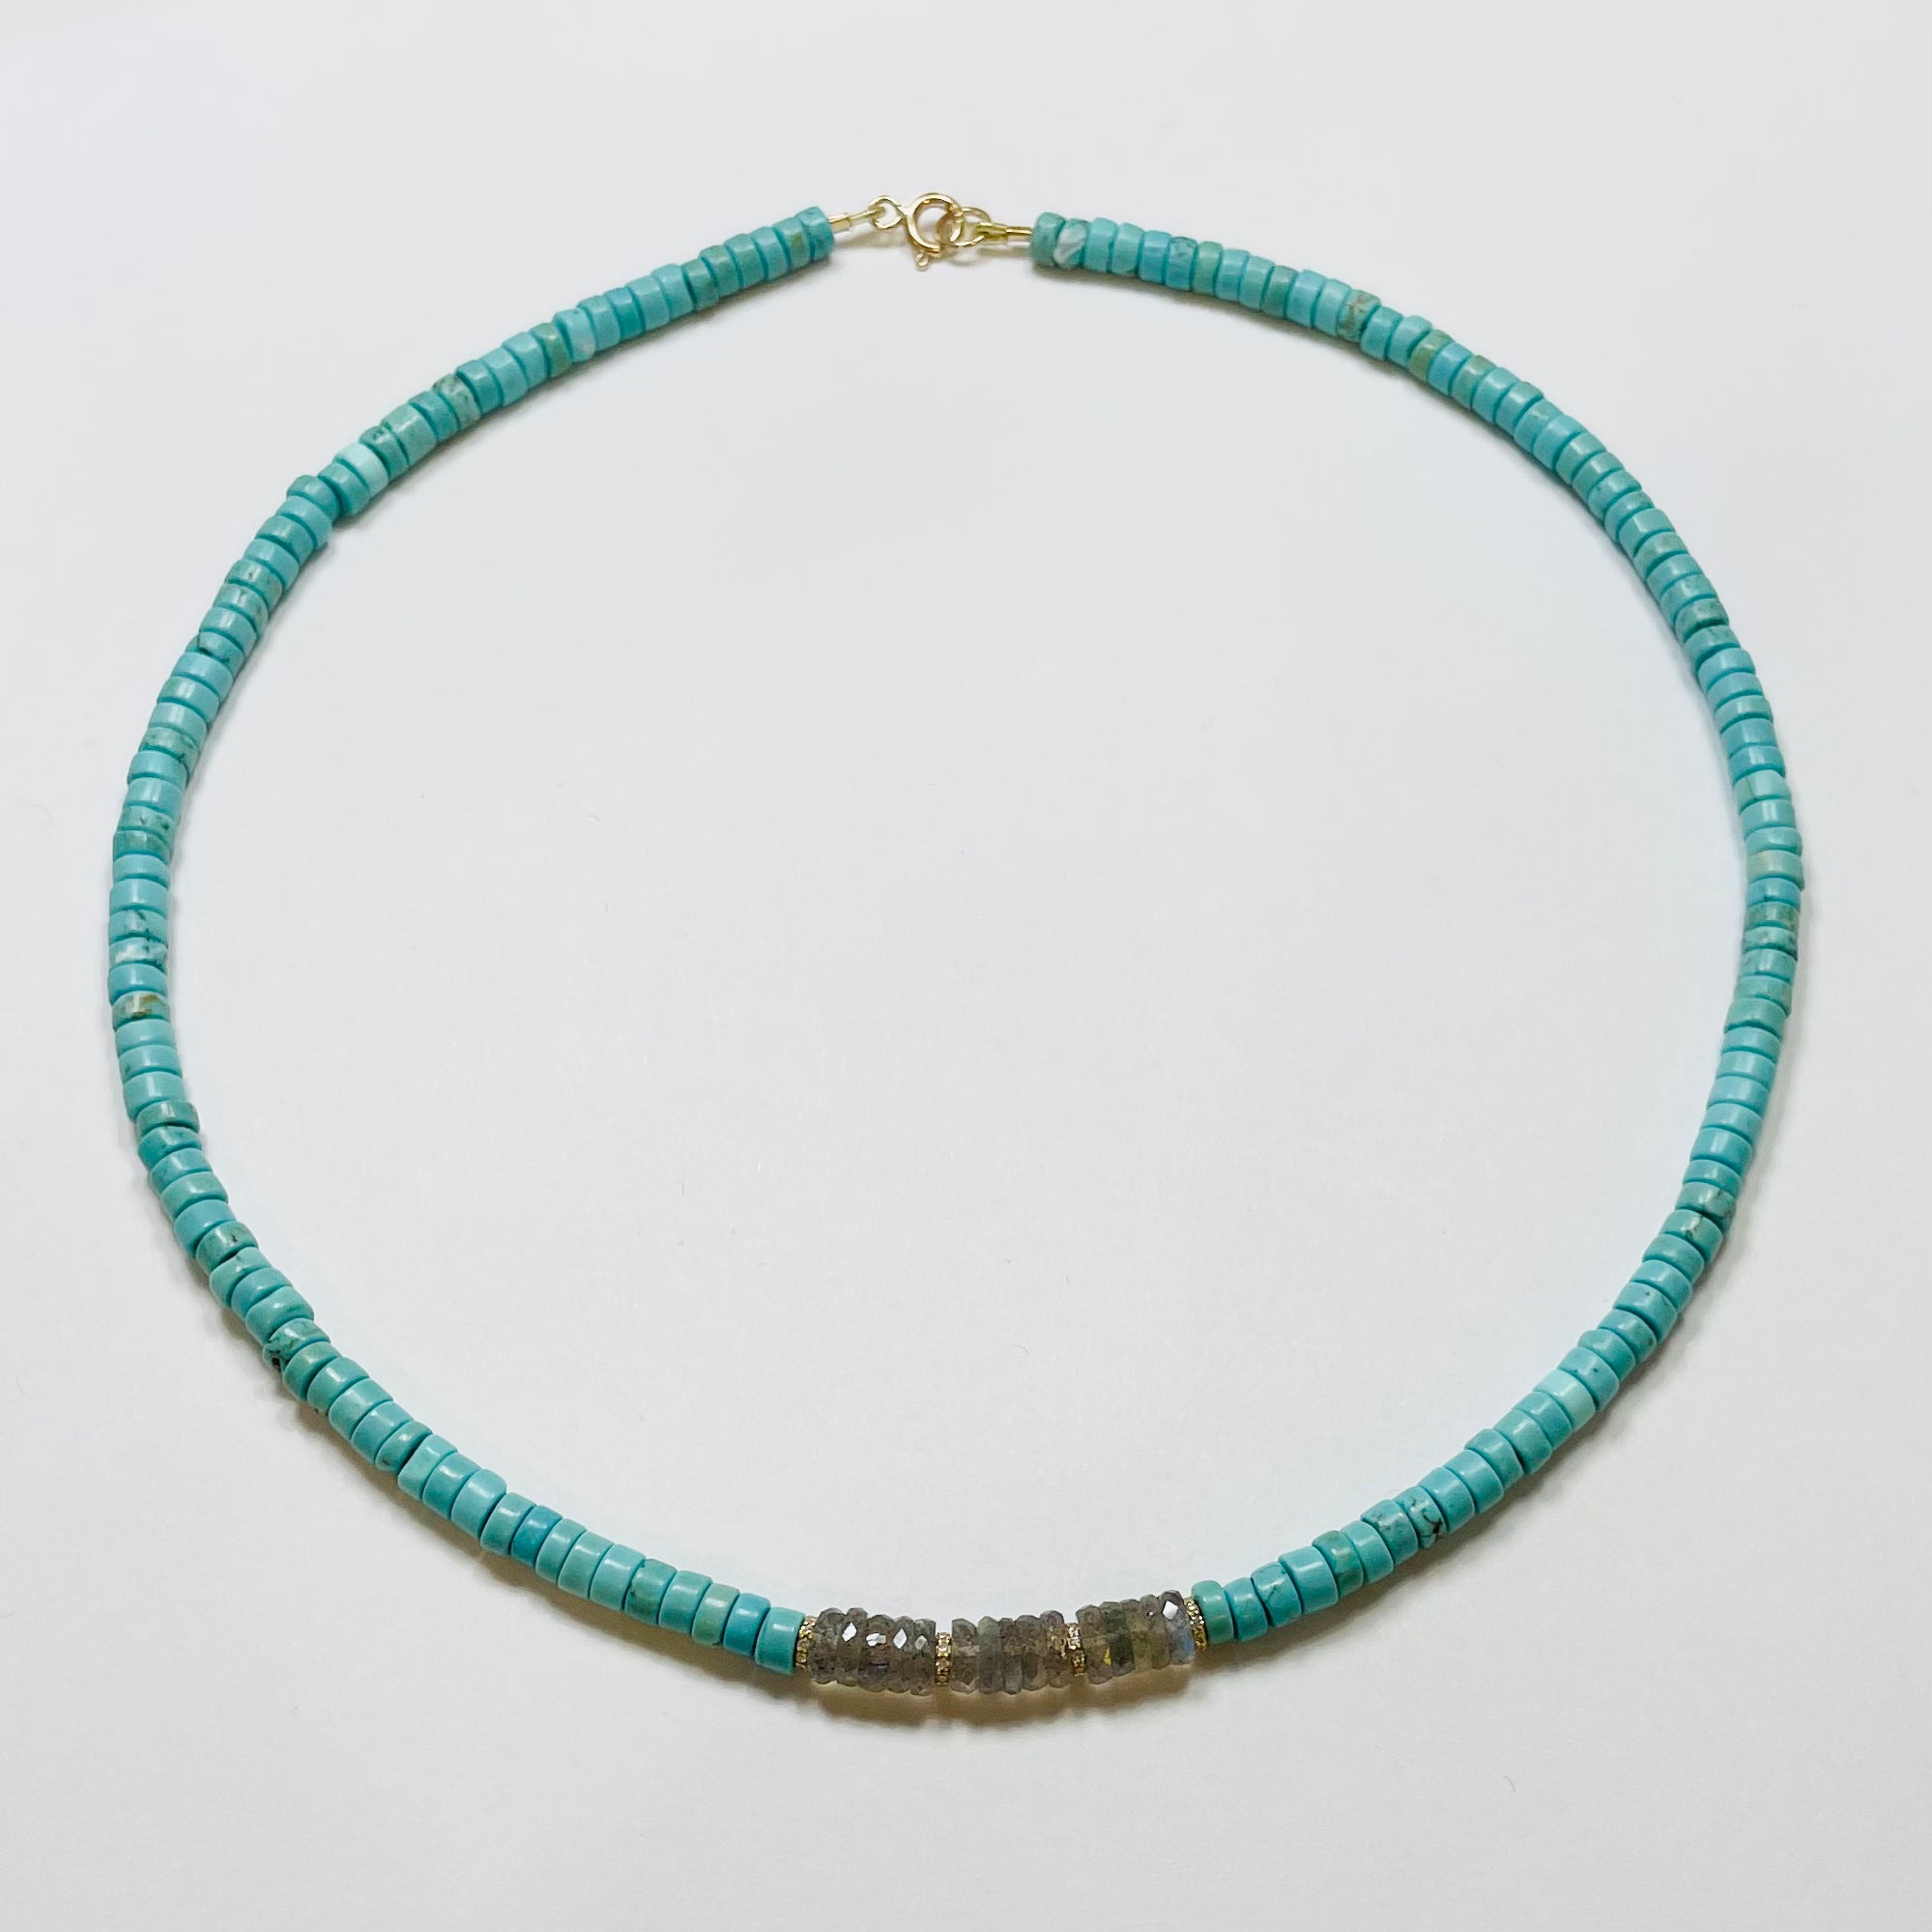 turquoise and labradorite necklace with gold beads